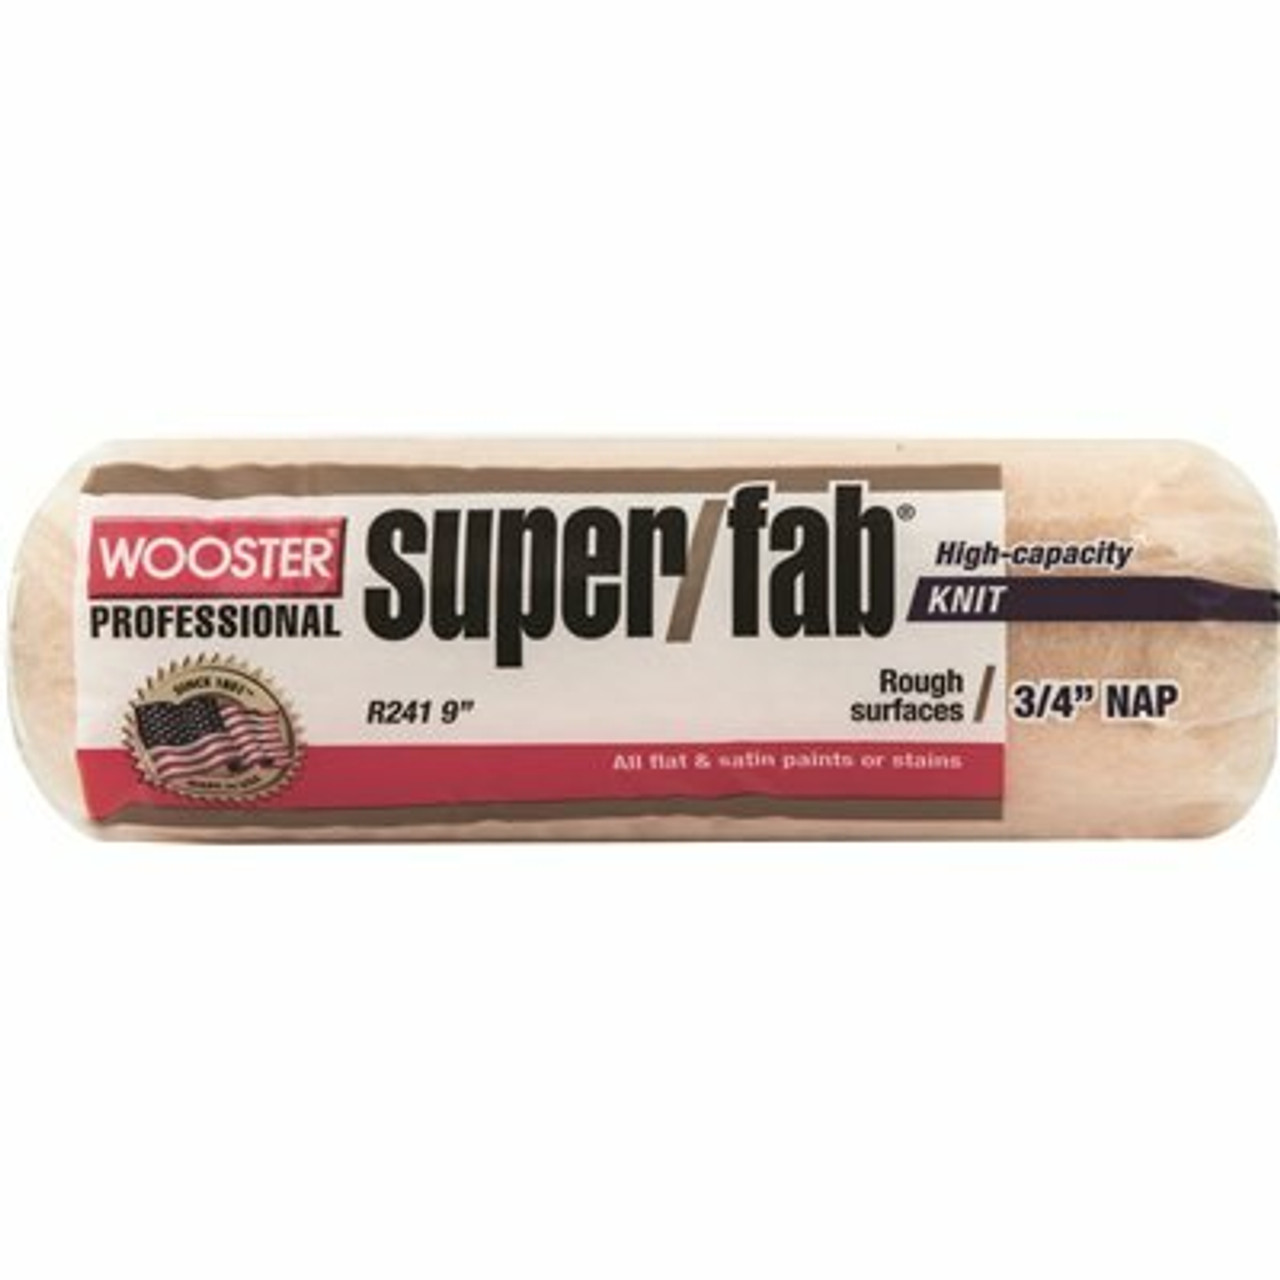 Wooster 9 In. X 3/4 In. Pro Super/Fab High-Density Knit Roller Cover